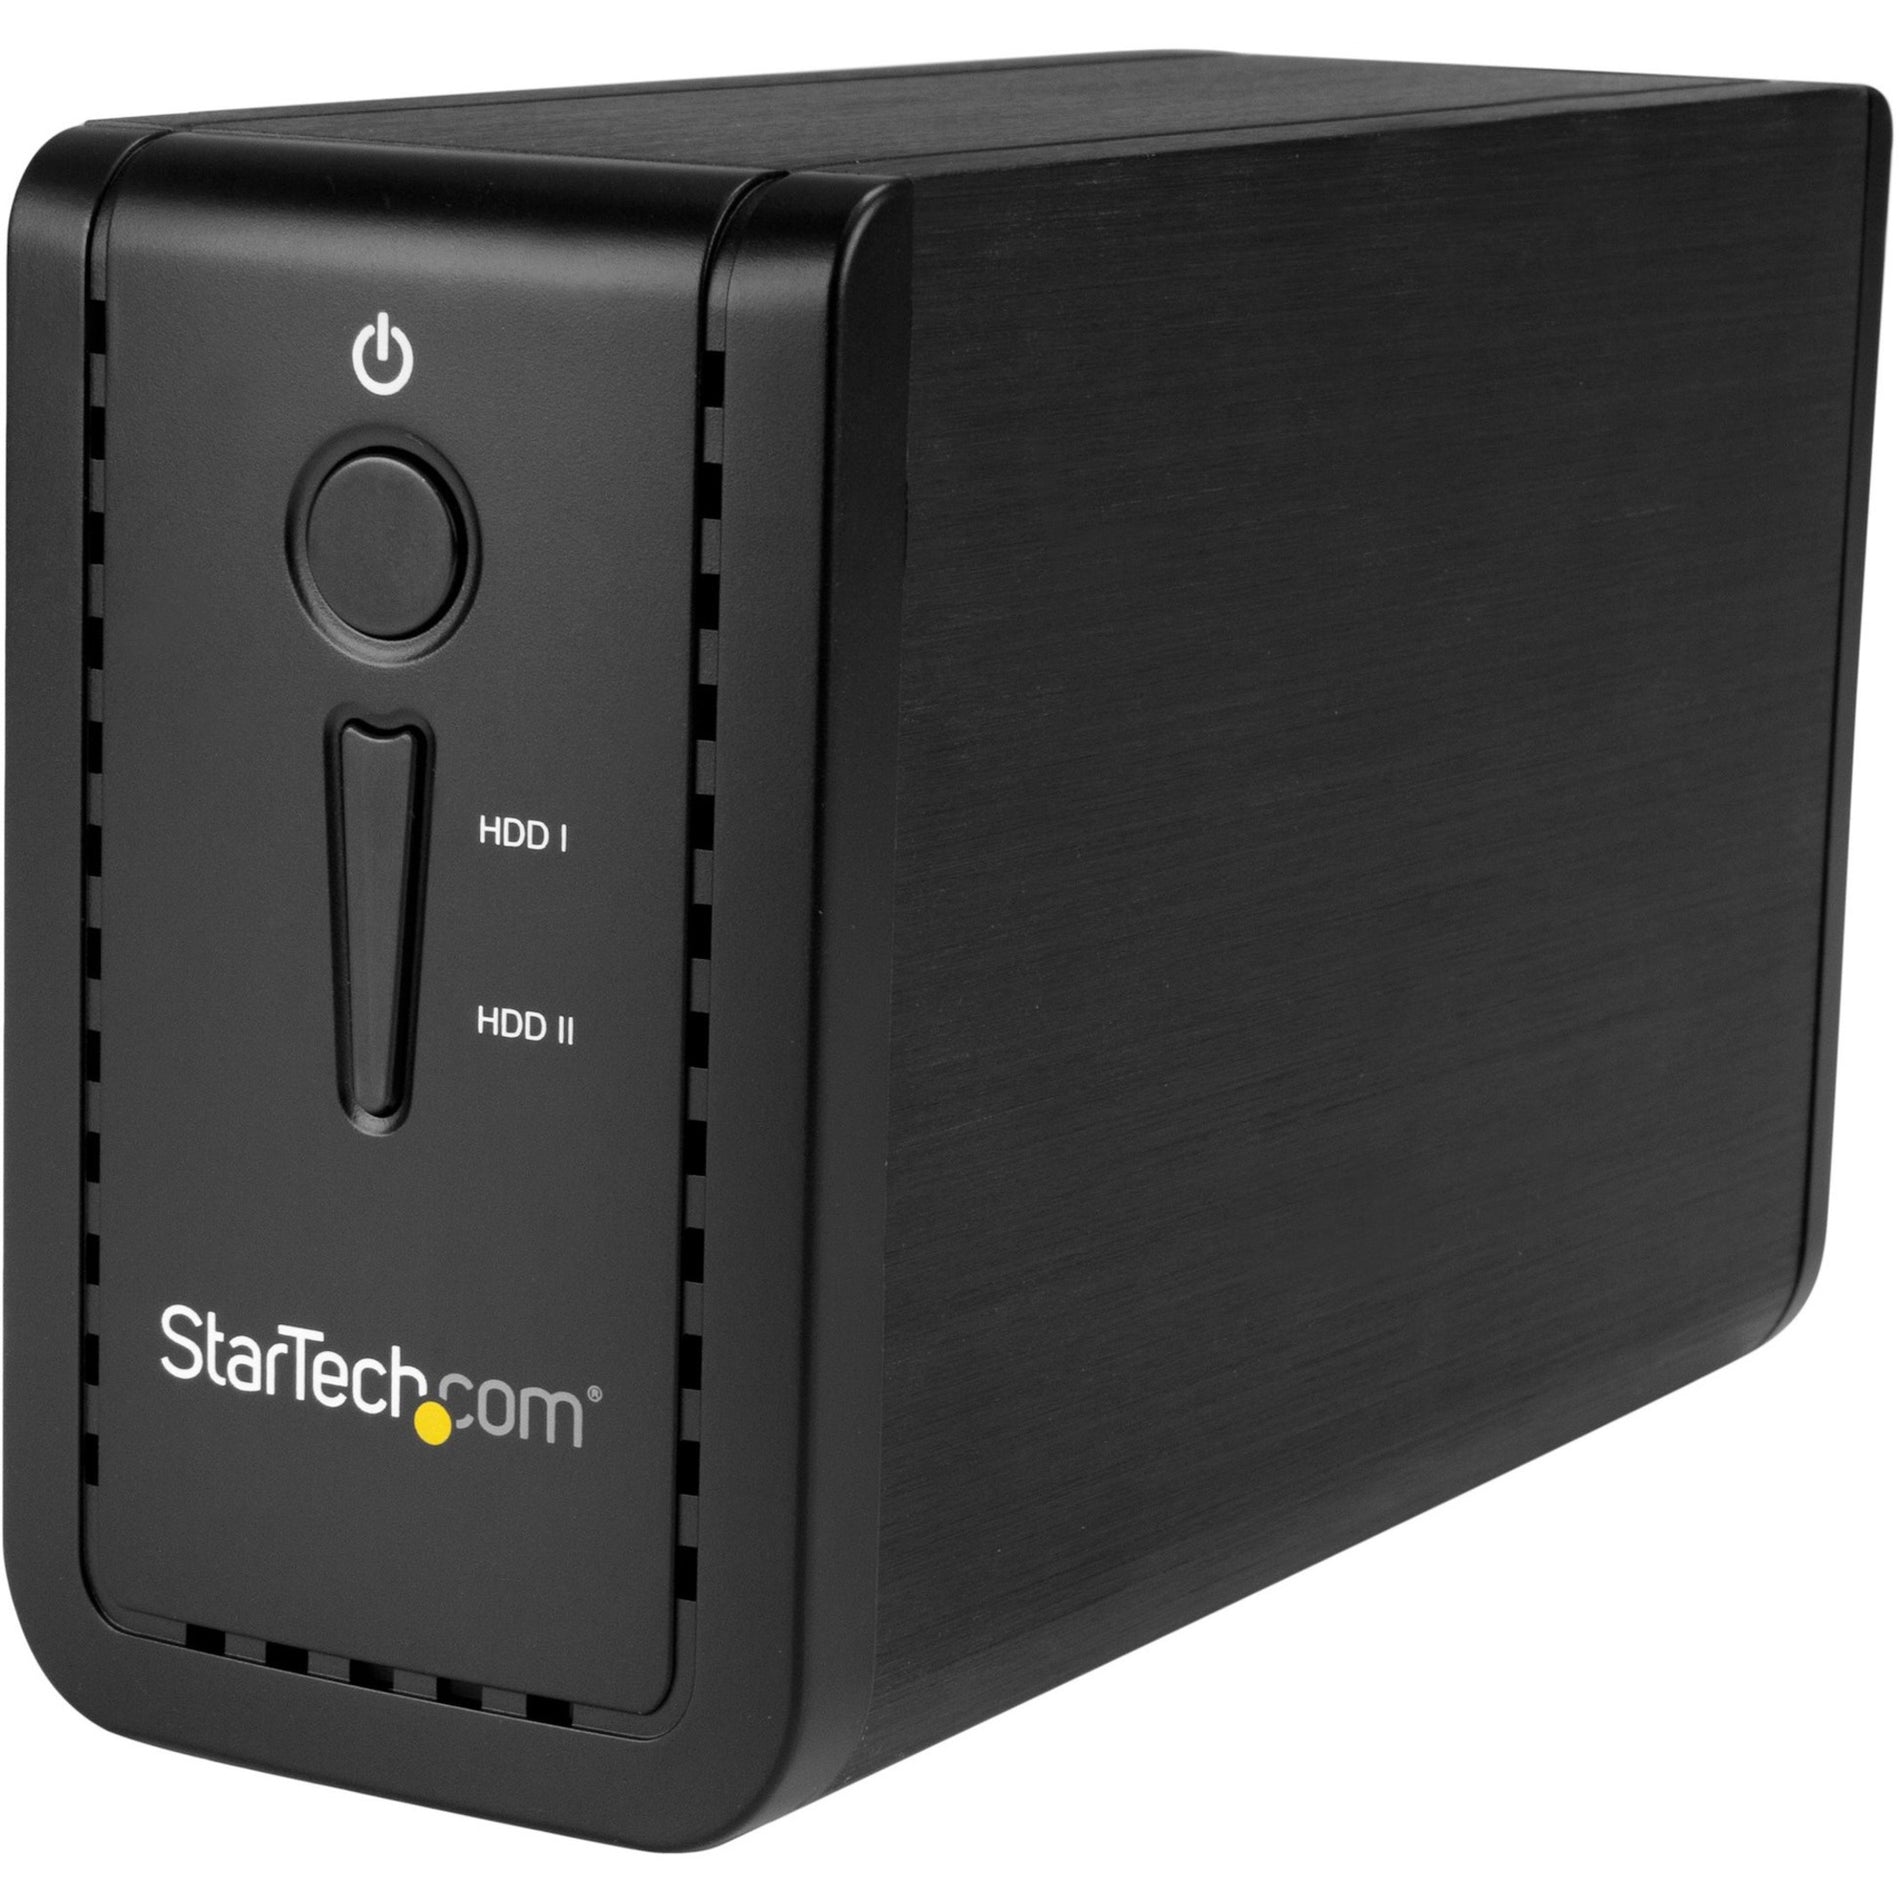 StarTech.com S352BU313R 2-Bay 3.5" HDD Enclosure with RAID - USB 3.1 - SATA (6Gbps) - Dual 3.5" HDD/SSD/SSHD External Drive Enclosure - USB-C and USB-A, High-Speed Data Transfer and Storage Solution